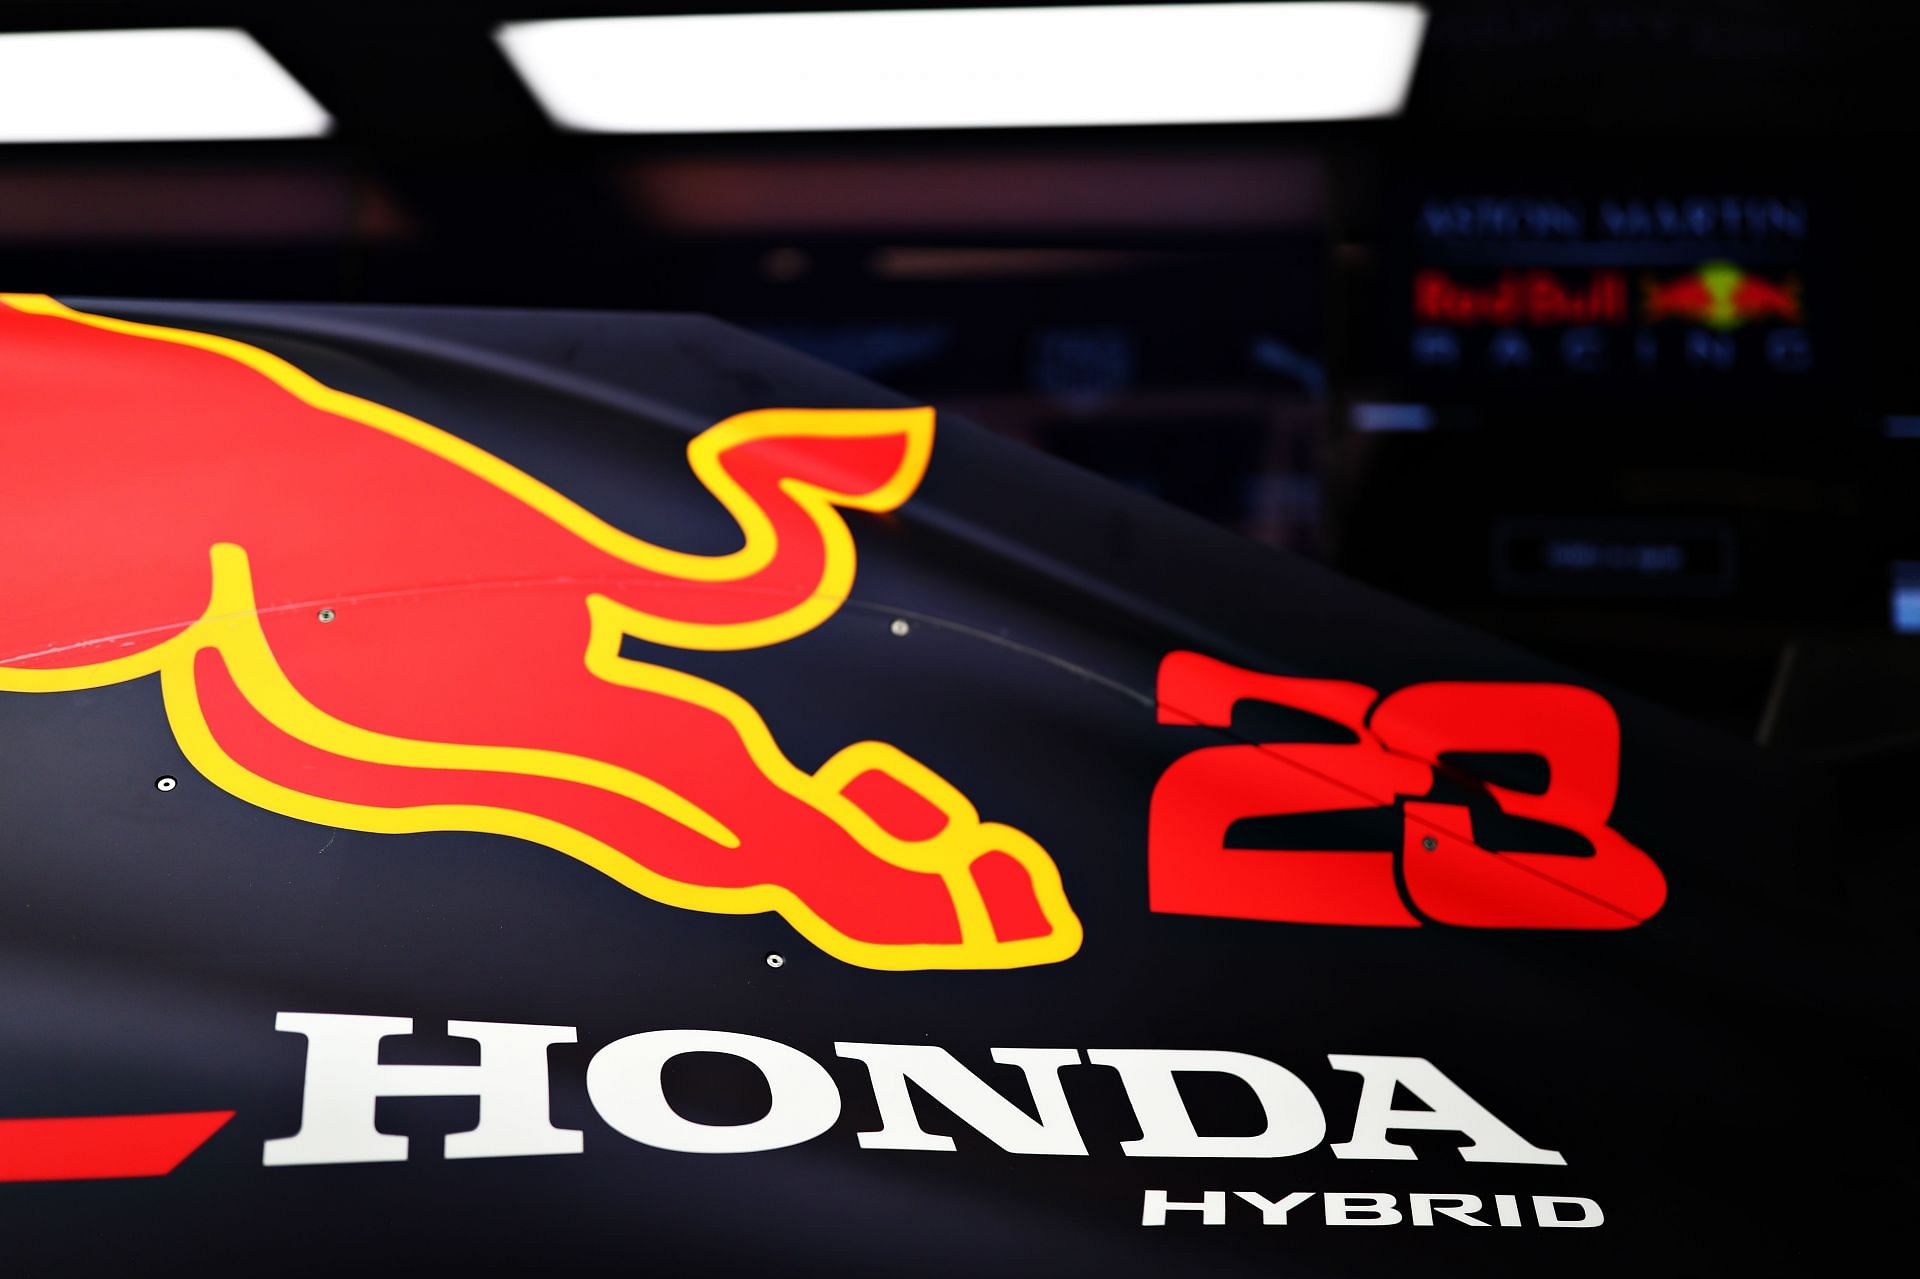 Honda officially exited F1 at the end of 2021, despite winning the championship with Max Verstappen